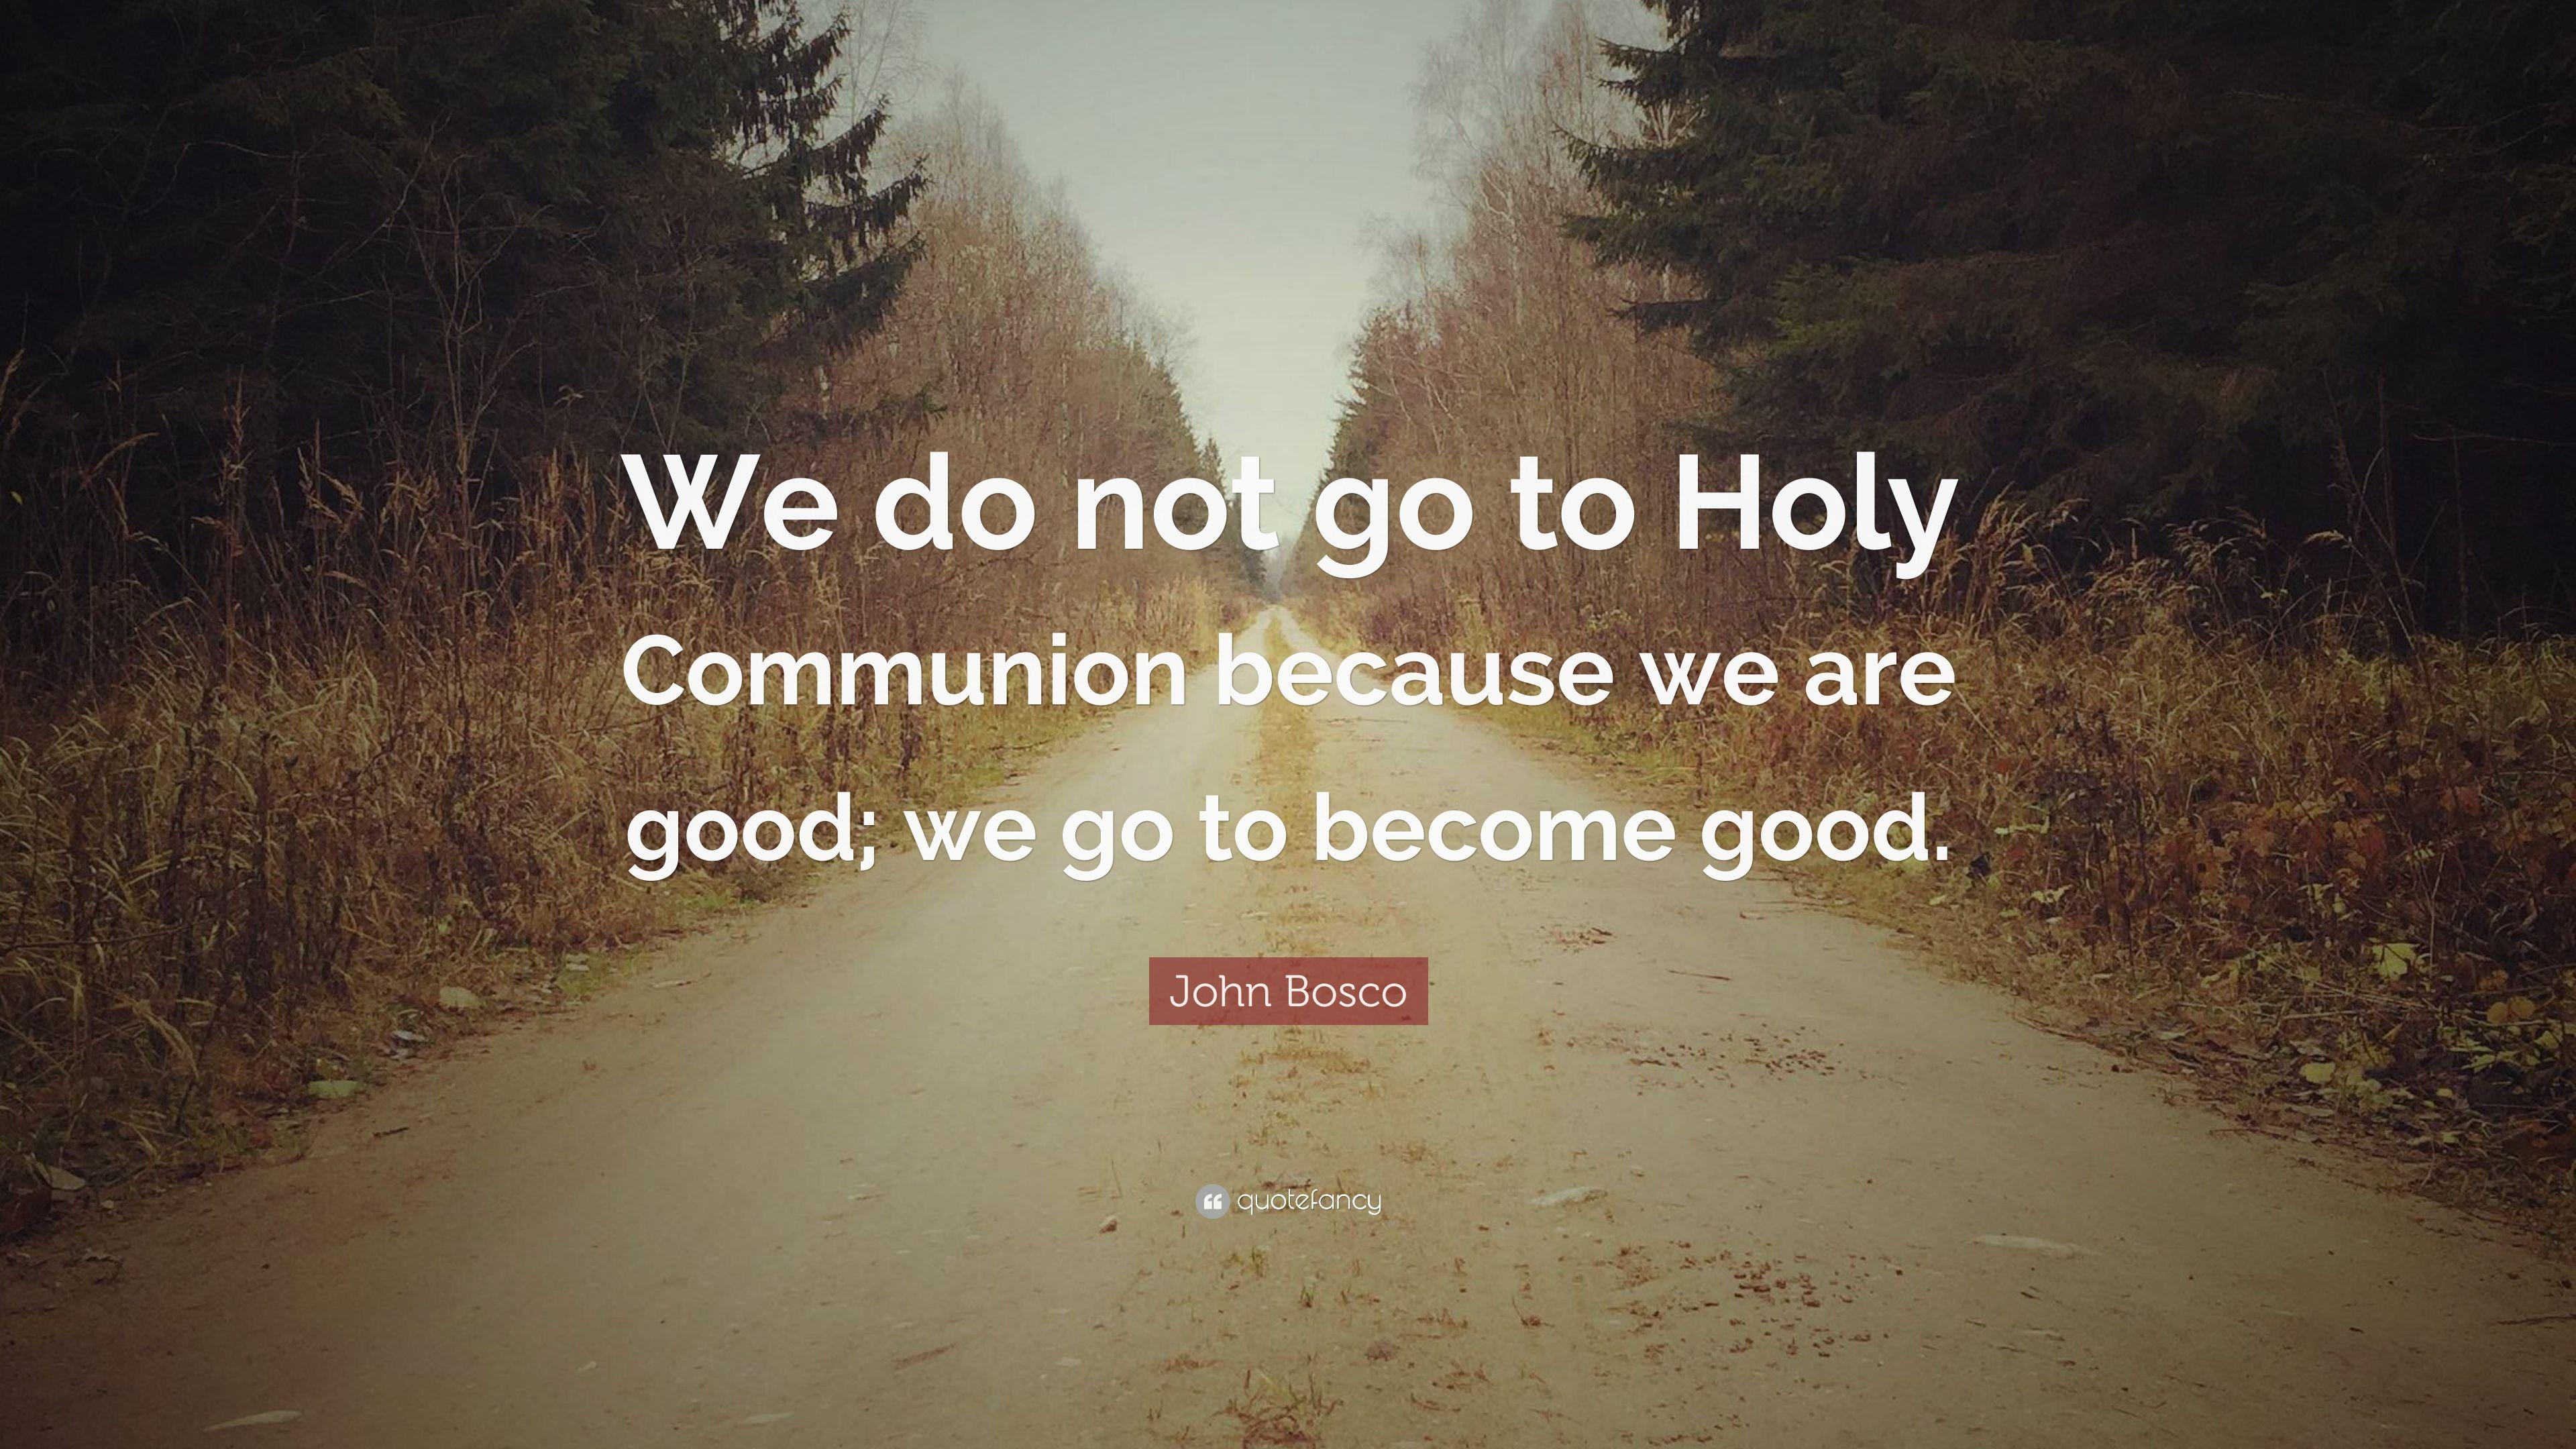 John Bosco Quote: “We do not go to Holy Communion because we are